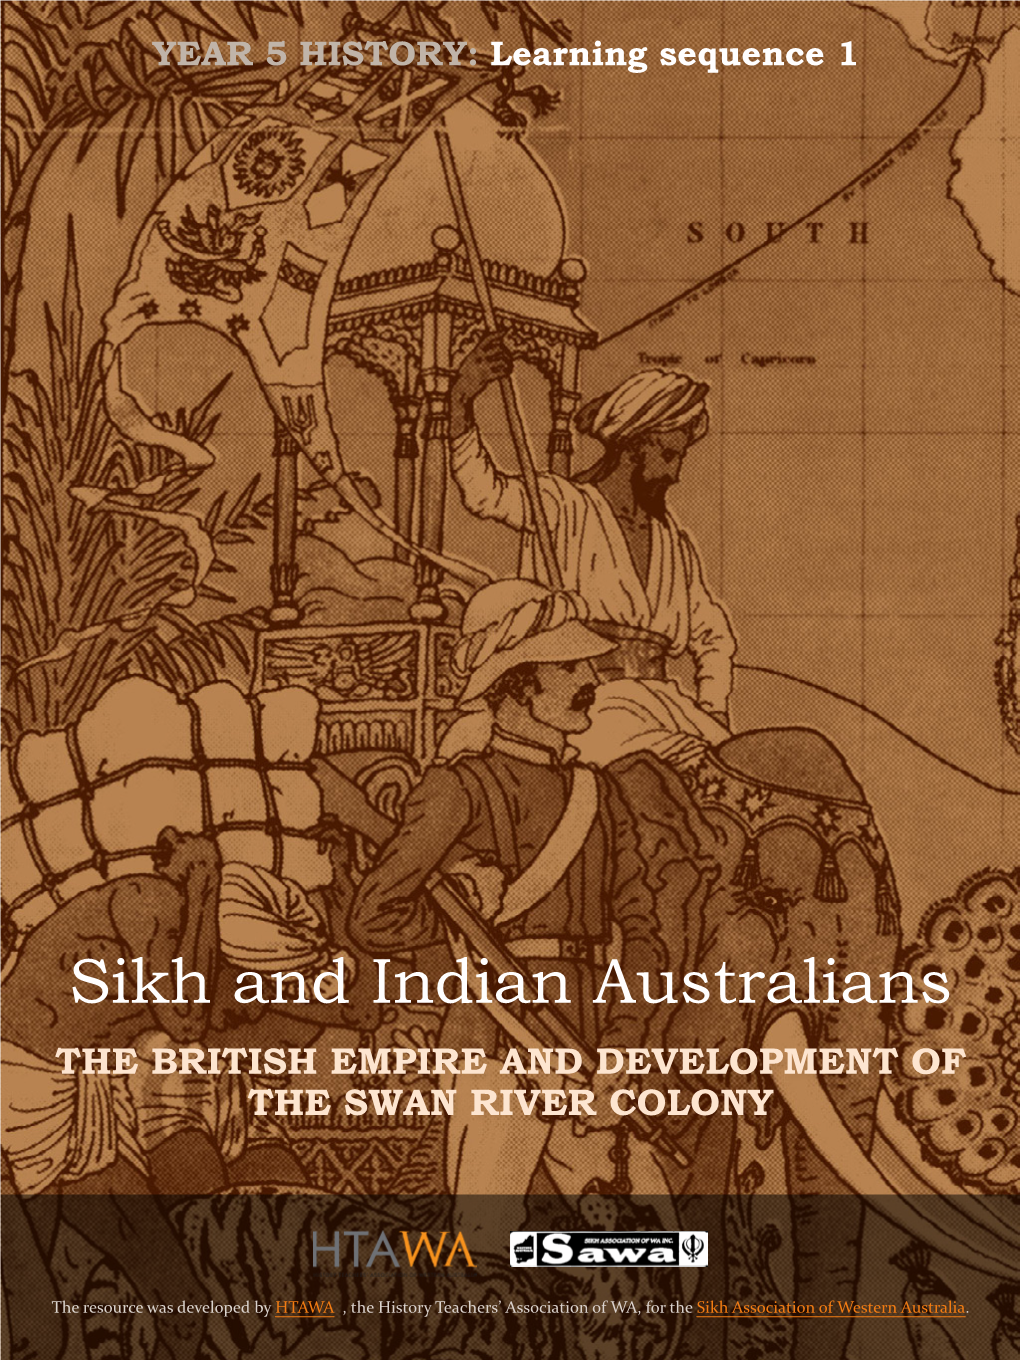 SIKH and INDIAN AUSTRALIANS Learning Sequence 1: the British